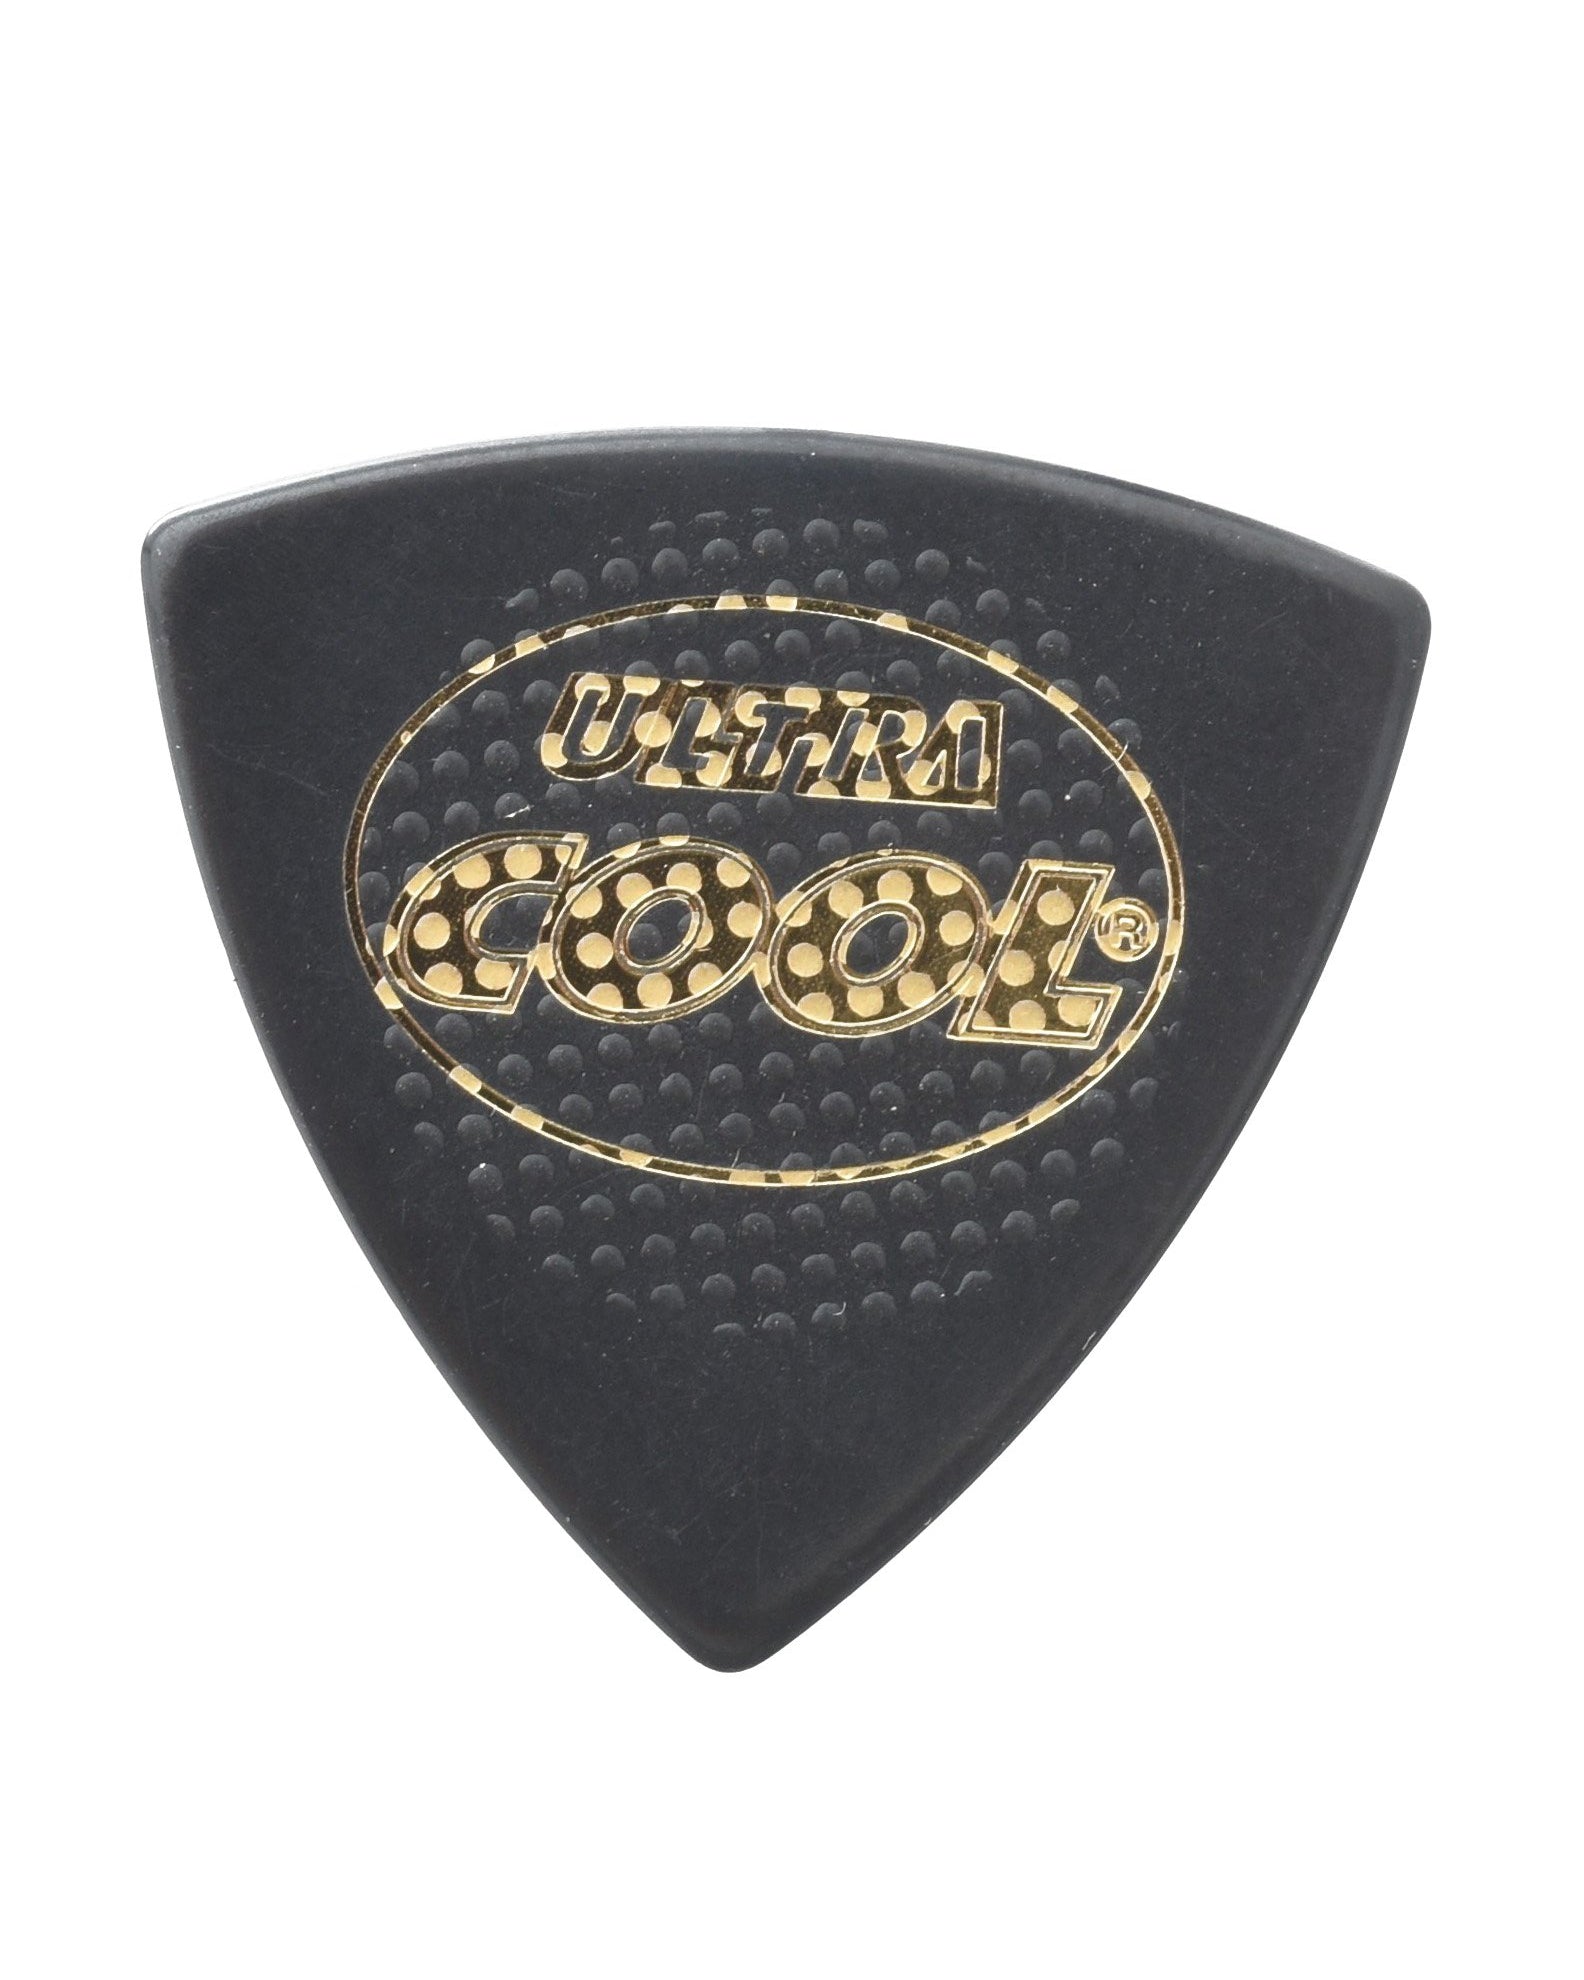 Cool Picks, Cool Picks "Ultra Cool" Series Triangle Pick, Heavy 1.0MM Thick